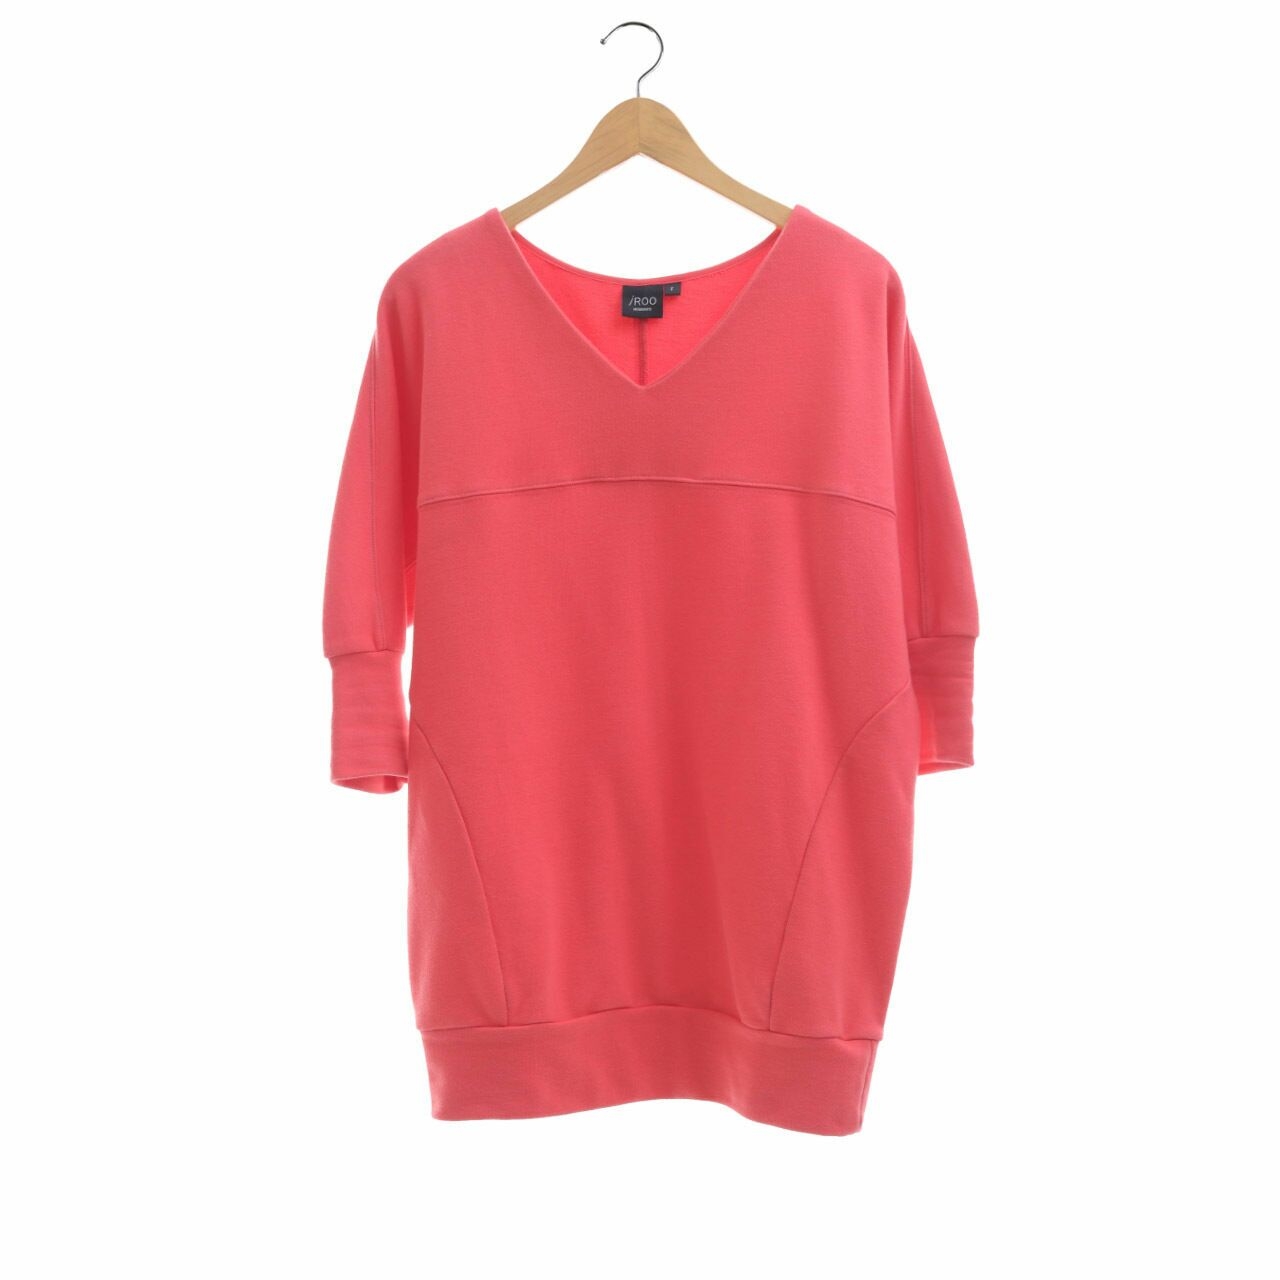 iRoo Pink Coral Blouse